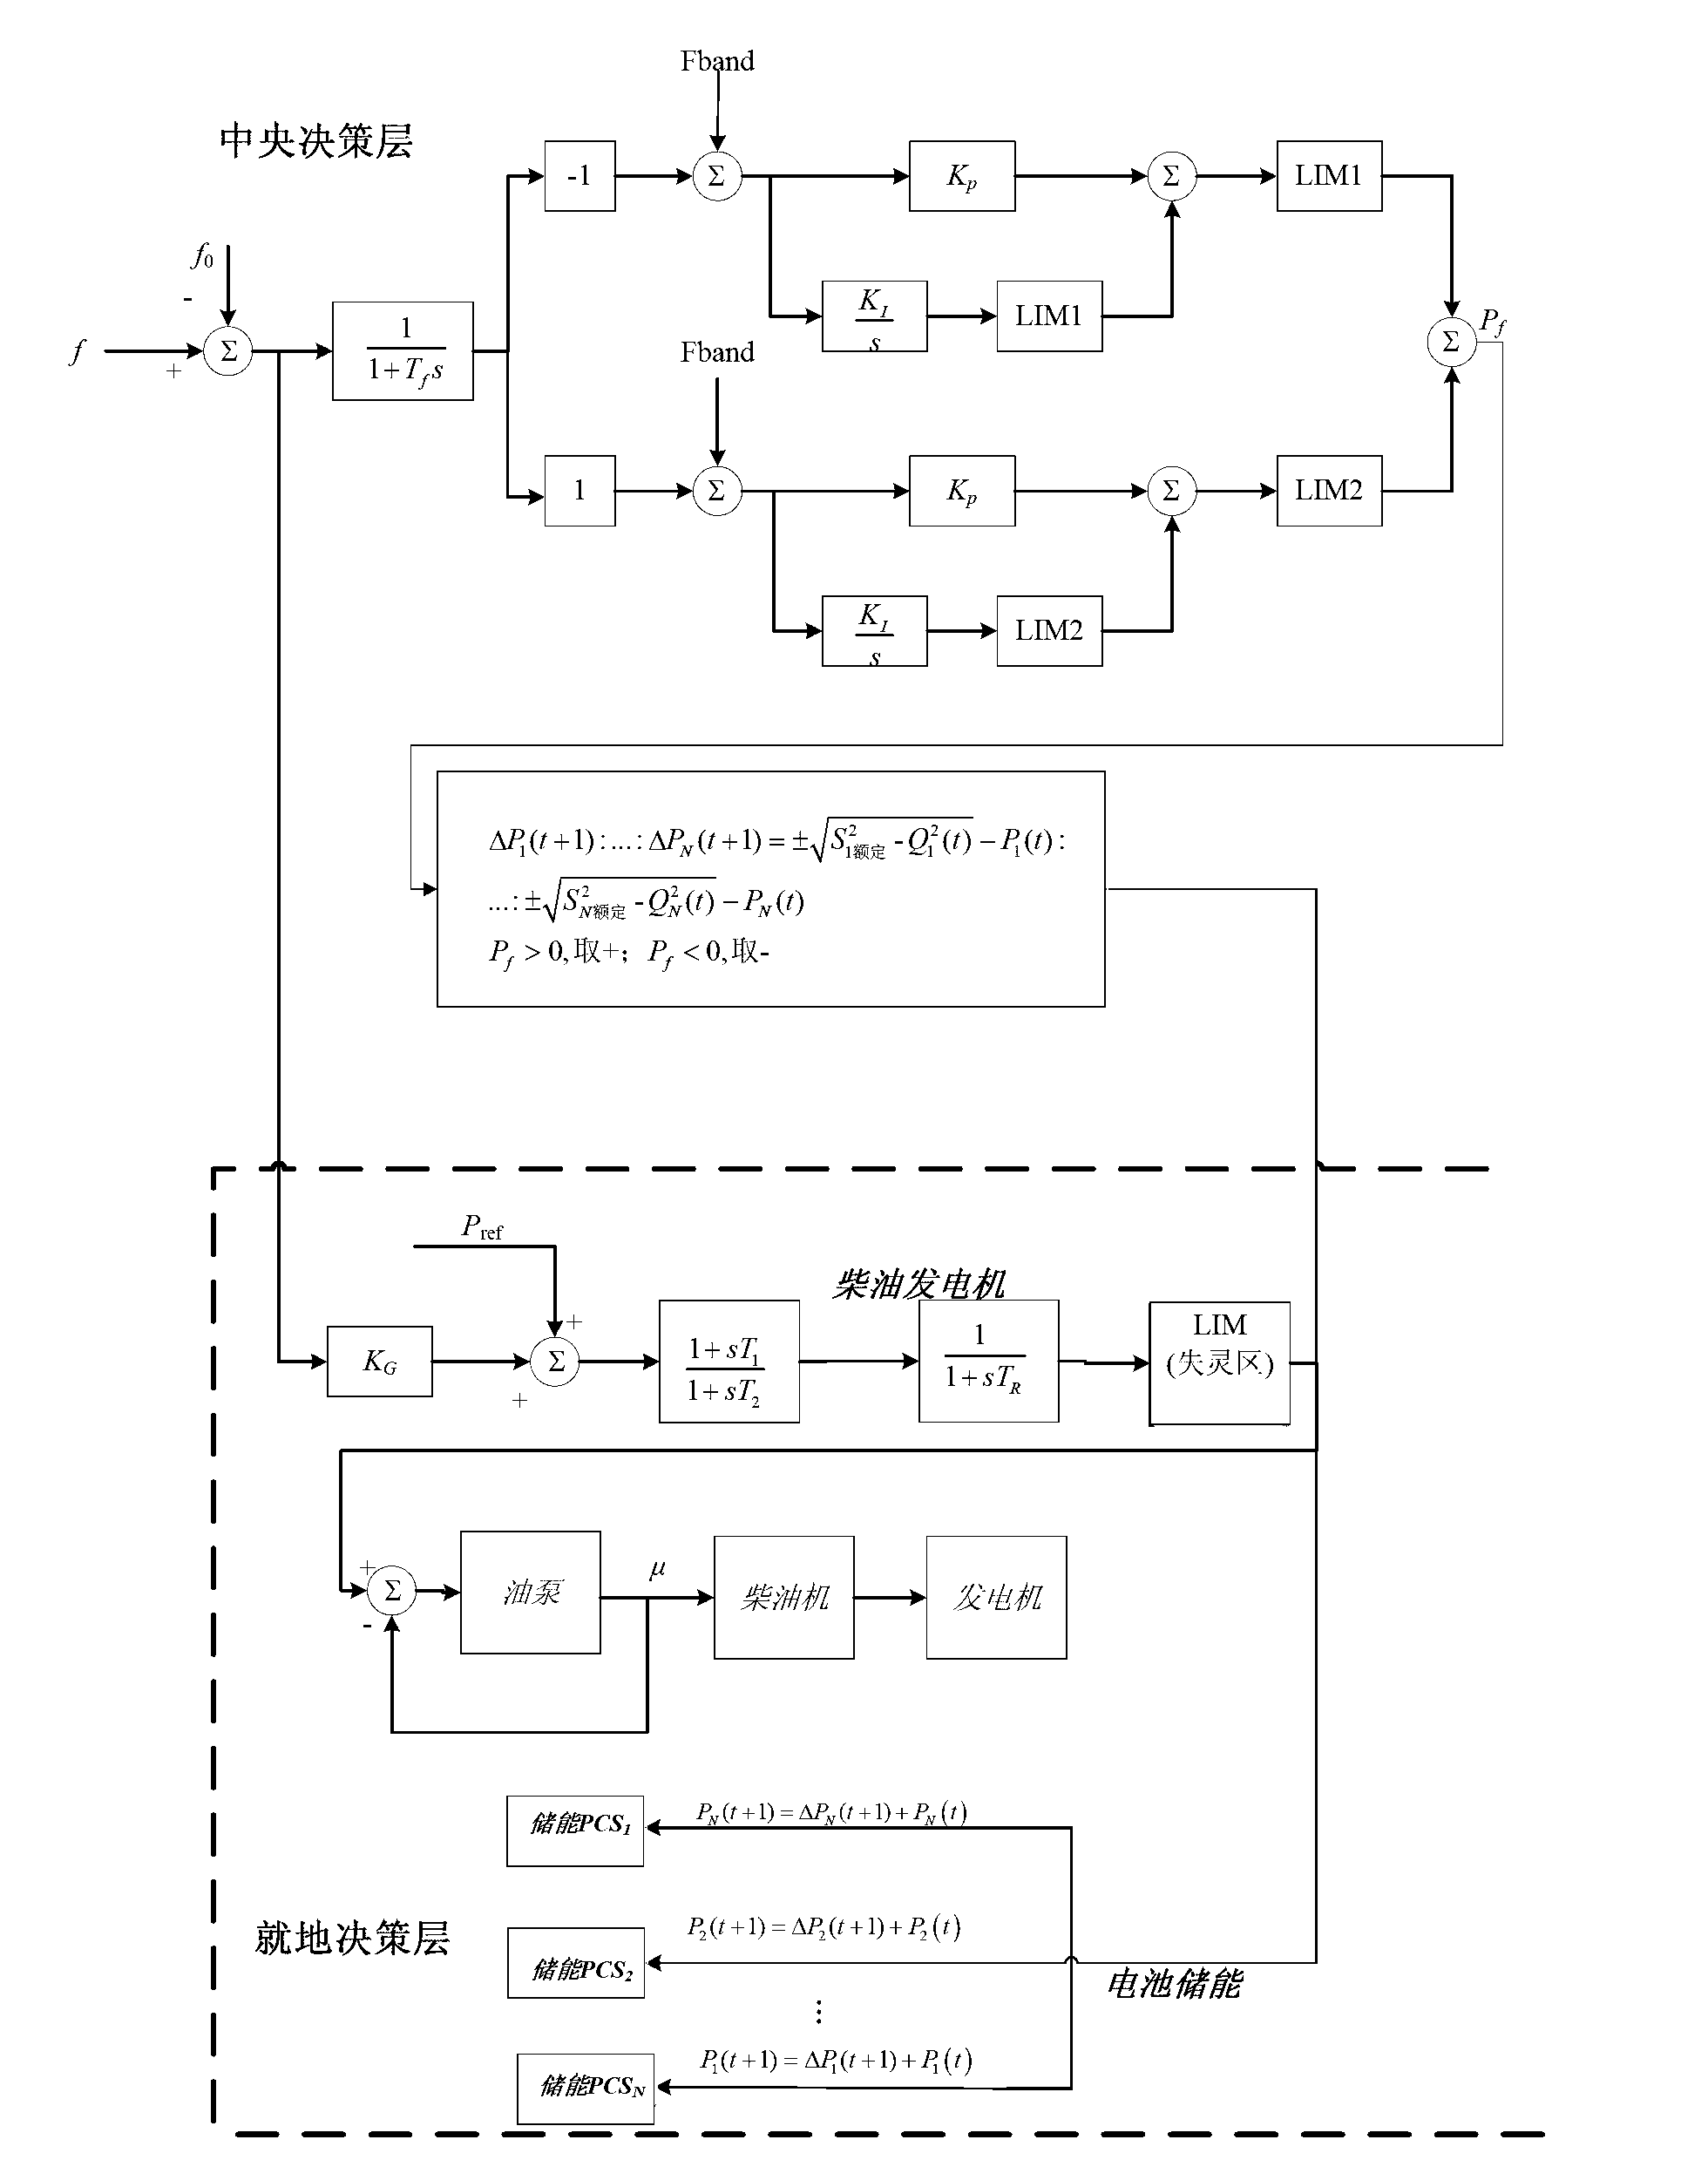 Frequency layering coordination control method suitable for isolated microgrid including diesel generator and battery storage